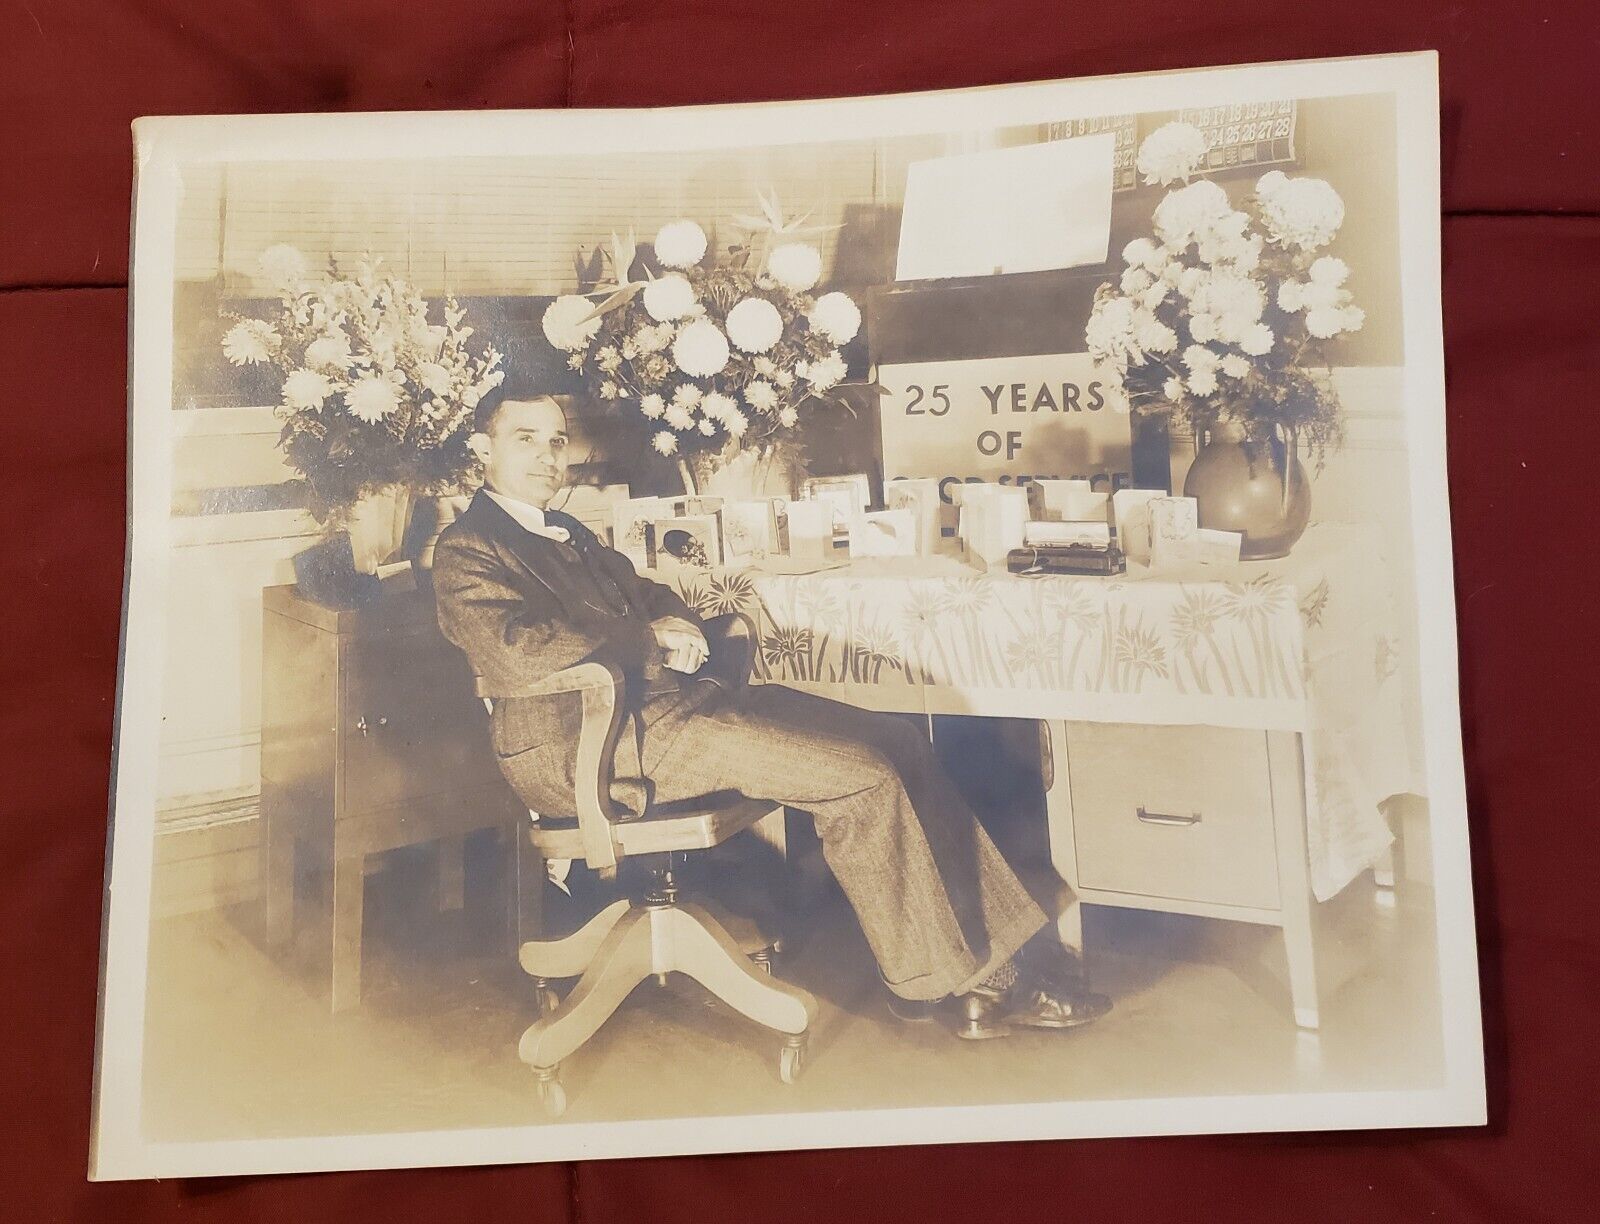 Photograph Of Man At Work- 25 Years Of Service- Possibly Henry Ford